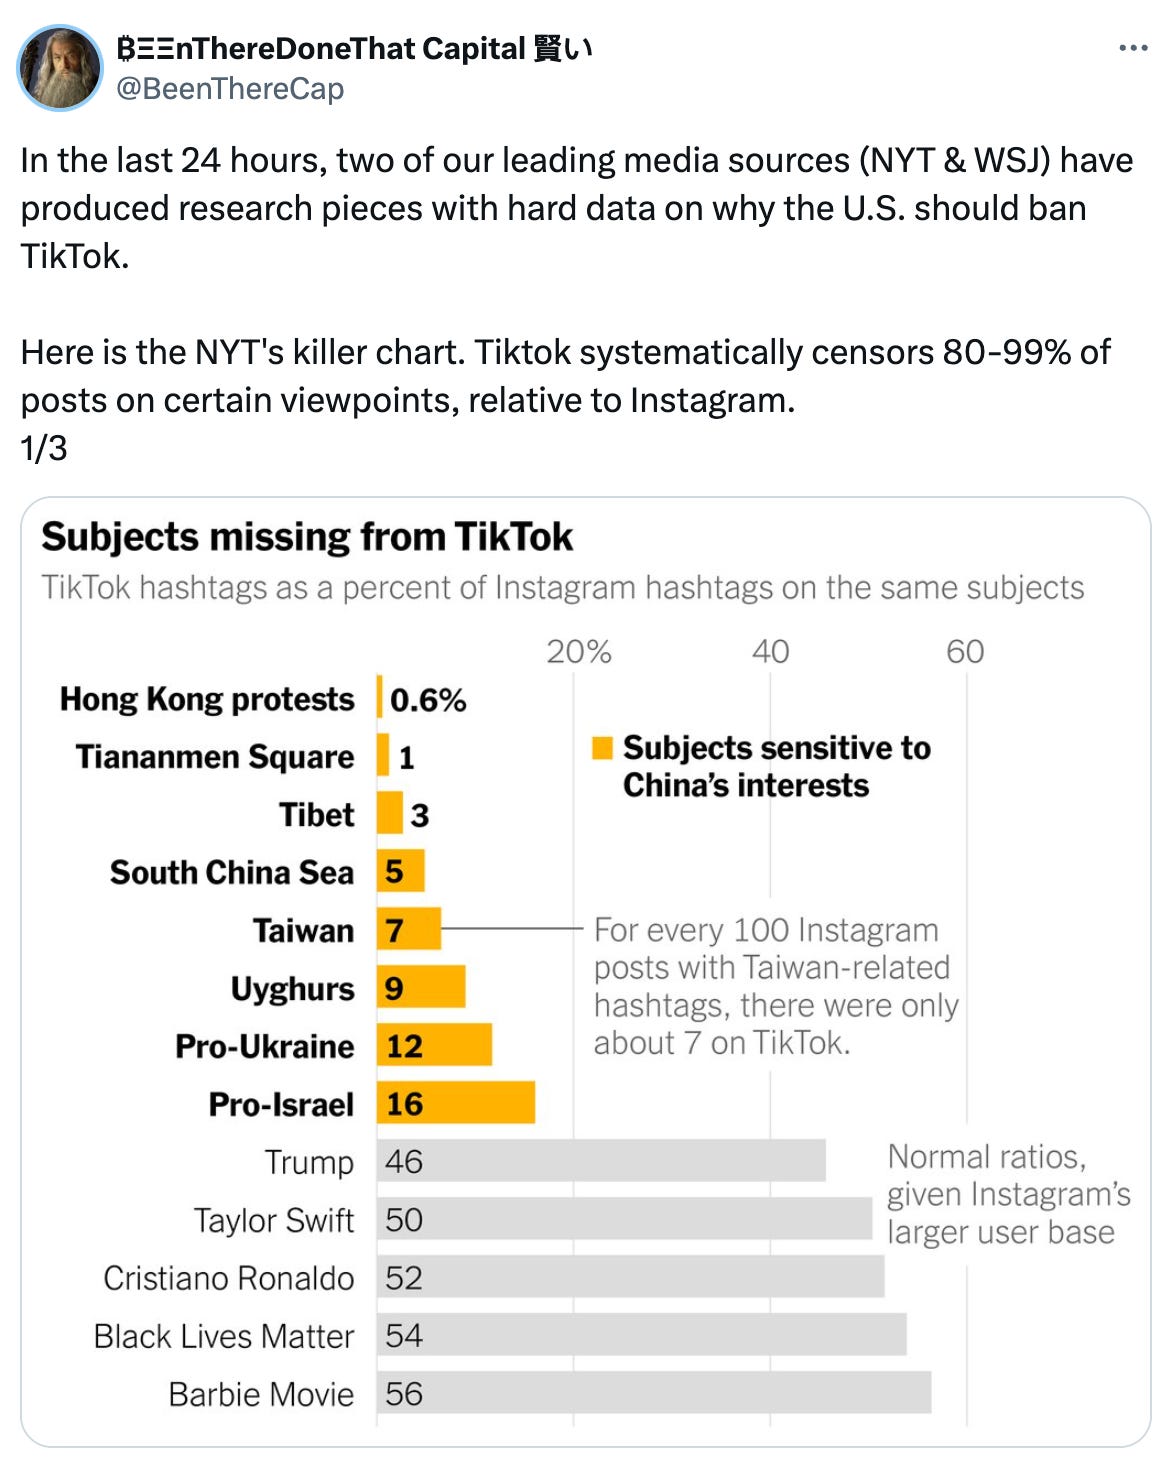  See new posts Conversation ₿ΞΞnThereDoneThat Capital 賢い @BeenThereCap In the last 24 hours, two of our leading media sources (NYT & WSJ) have produced research pieces with hard data on why the U.S. should ban TikTok.  Here is the NYT's killer chart. Tiktok systematically censors 80-99% of posts on certain viewpoints, relative to Instagram. 1/3